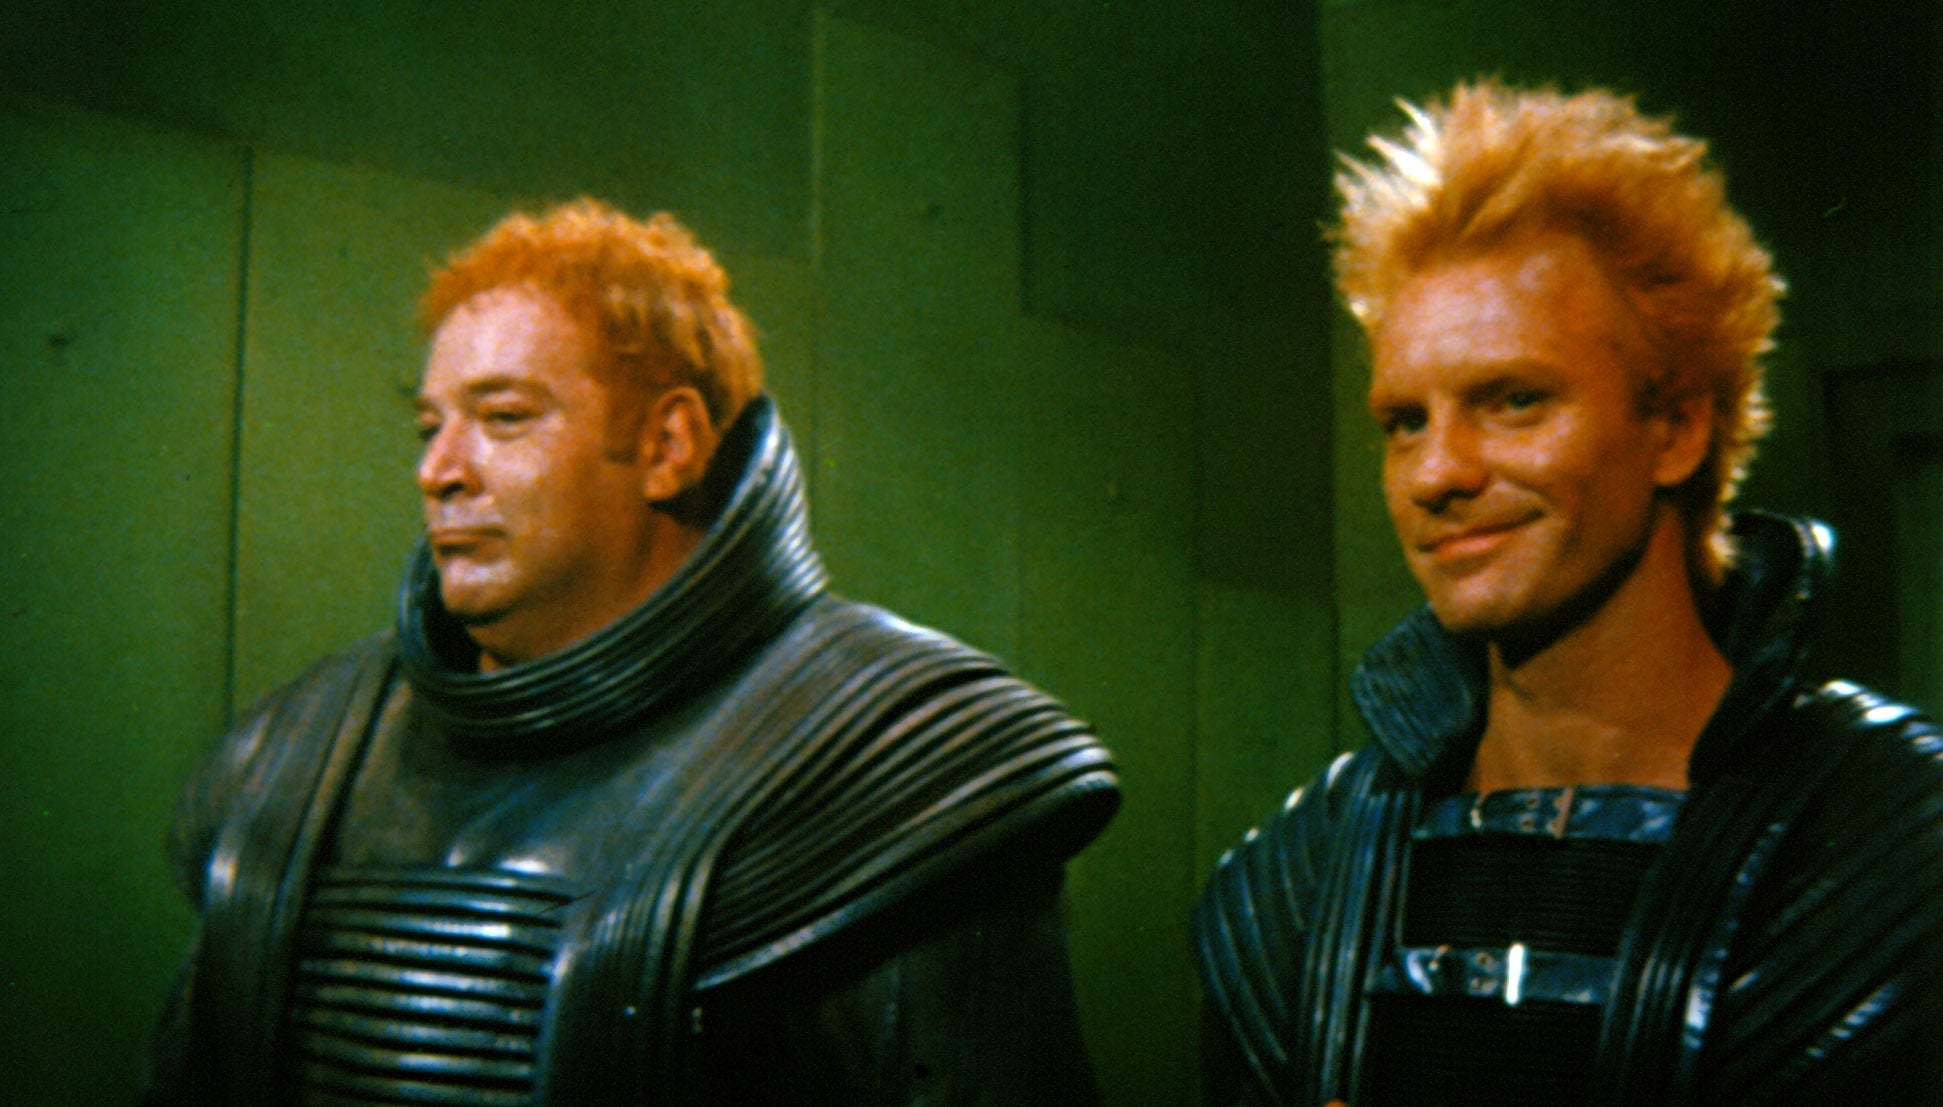 Sting (right) was among the cast of the widely panned 1984 film adaptation